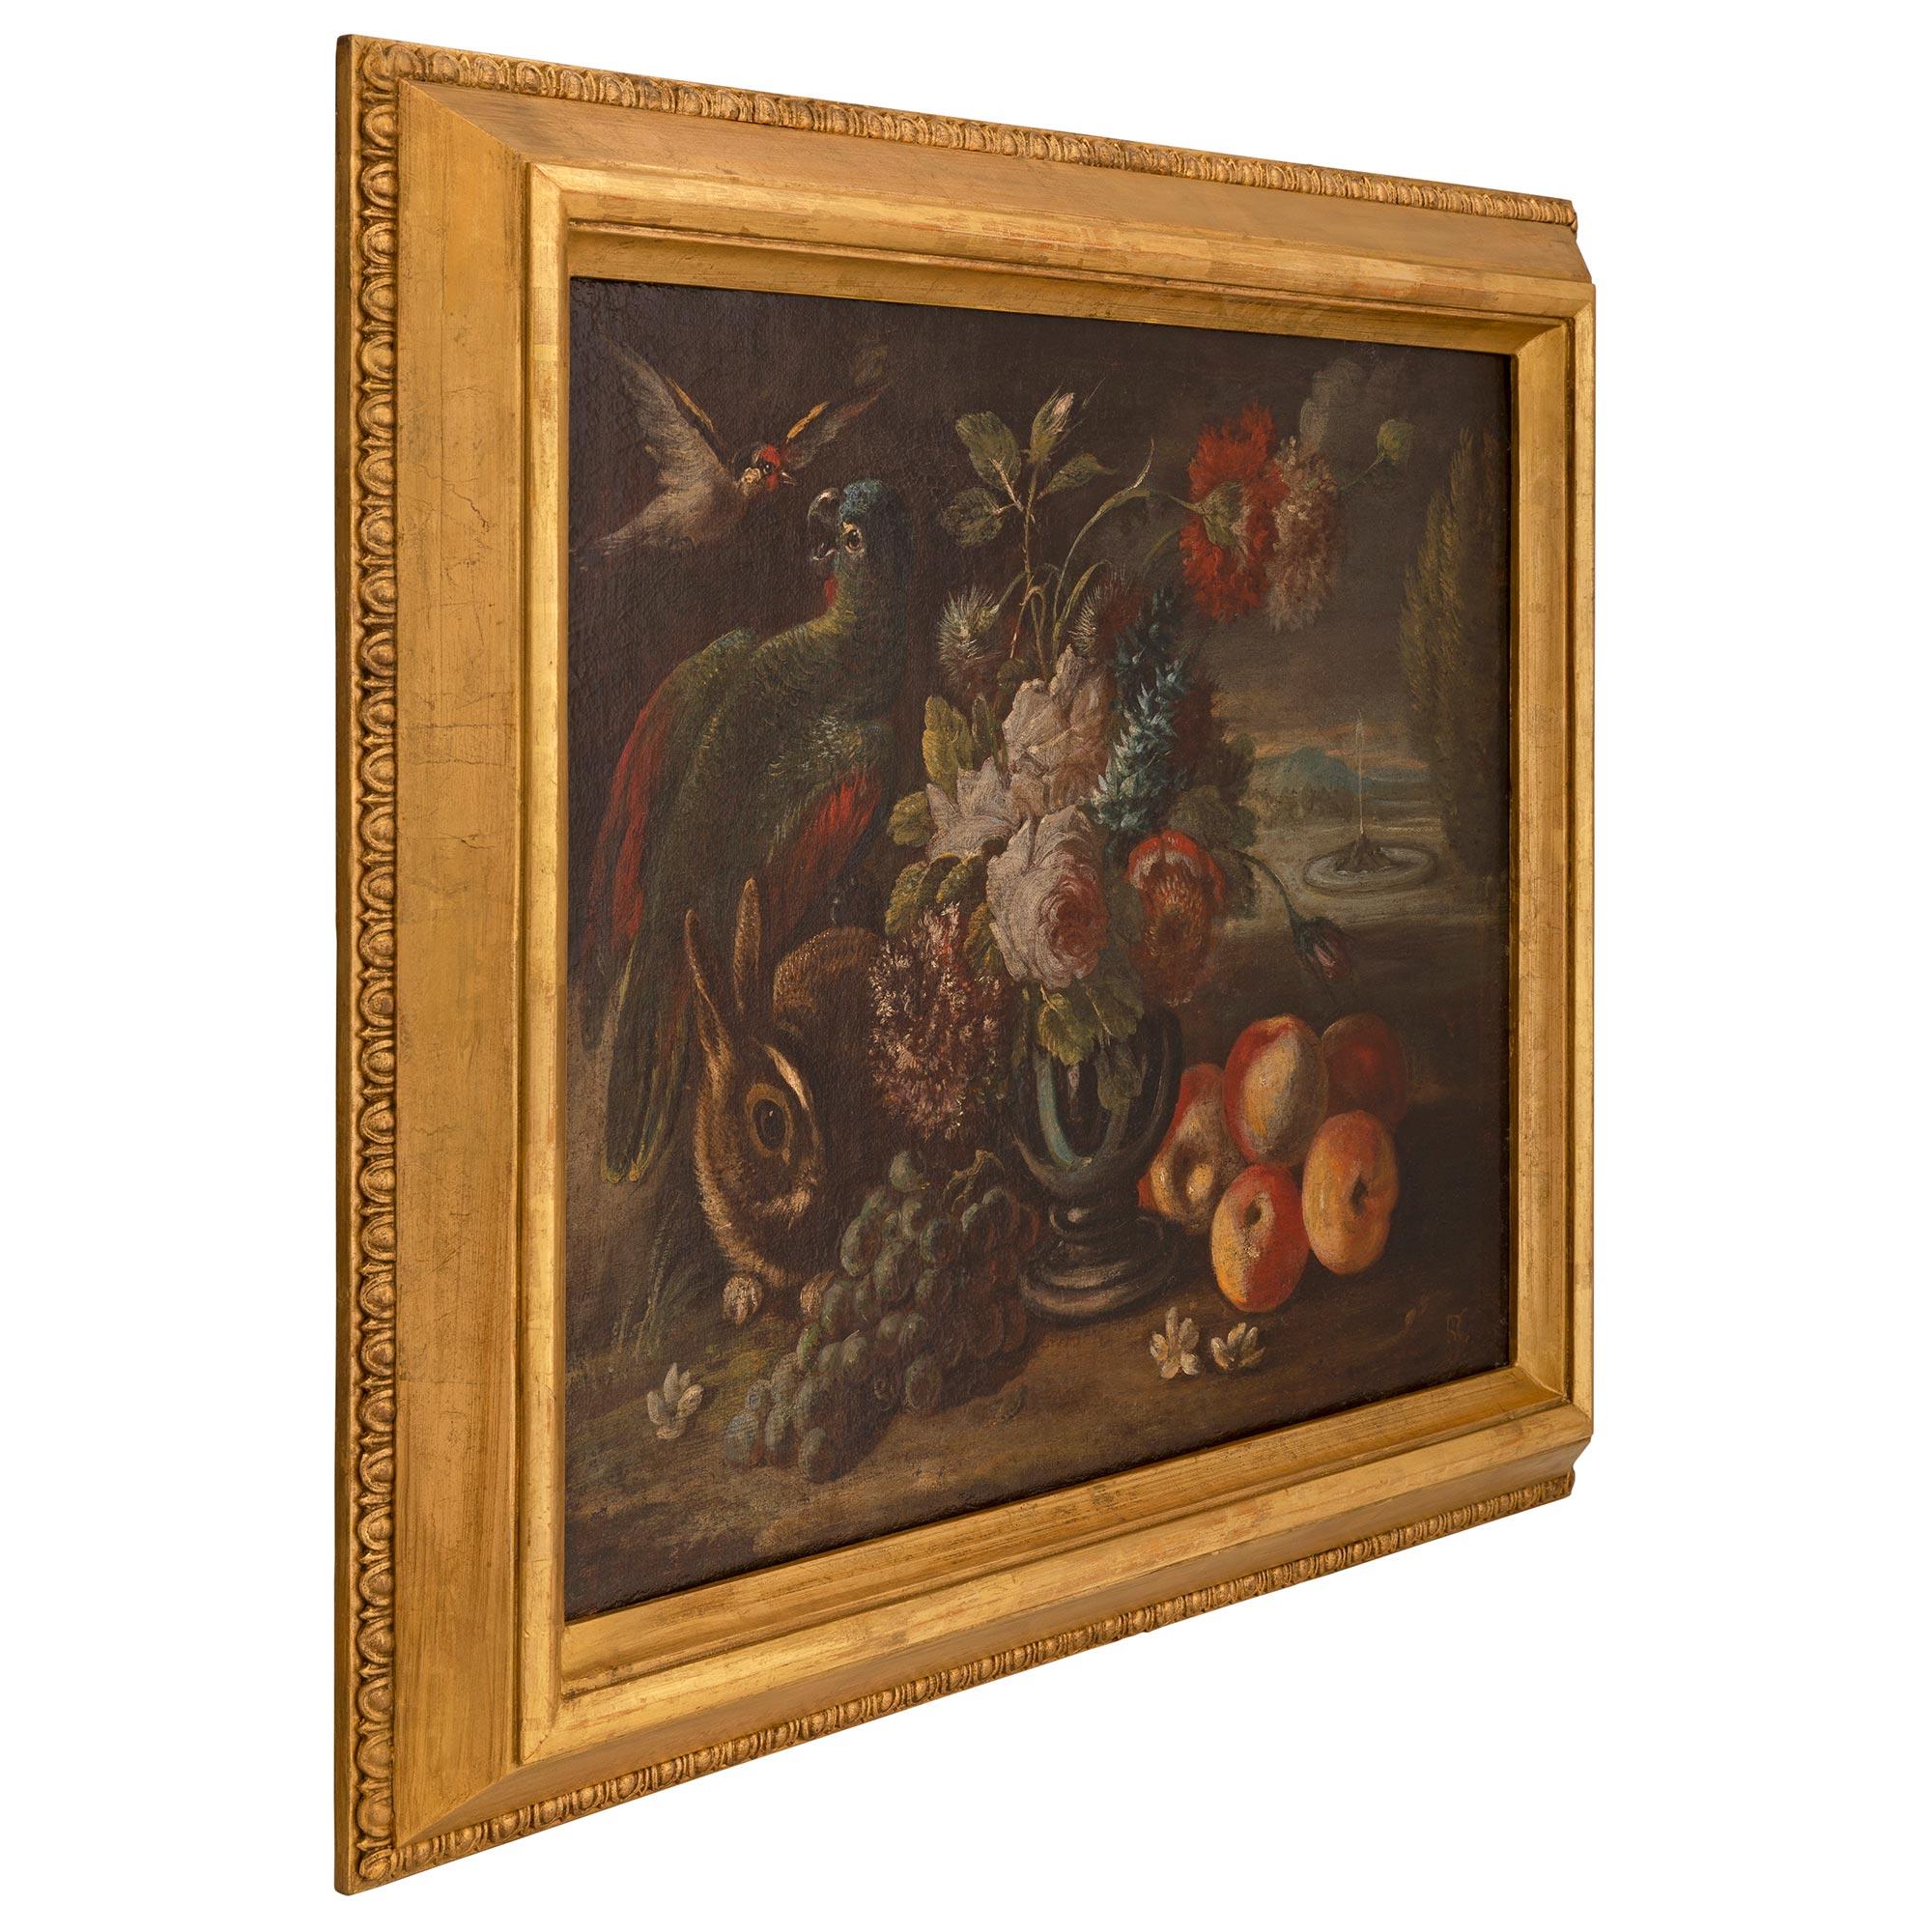 An exceptional Continental late 17th century oil on canvas still life painting, in a 19th century giltwood frame. The beautiful painting displays a wonderful array of vivid colors and depicts a charming rabbit, parrot and bird in a beautiful outside